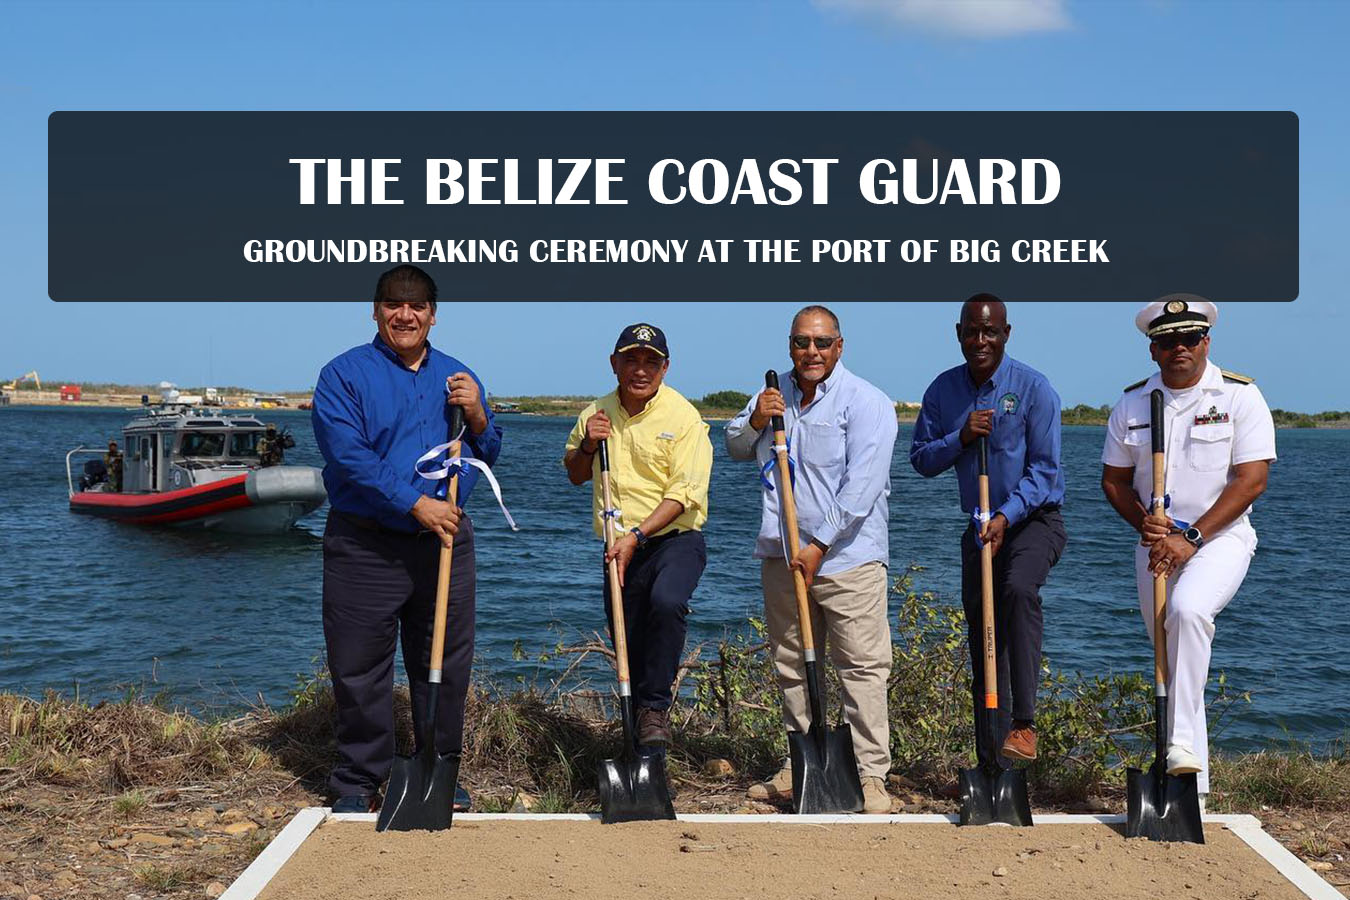 The Belize Coast Guard Groundbreaking Ceremony at the Port of Big Creek